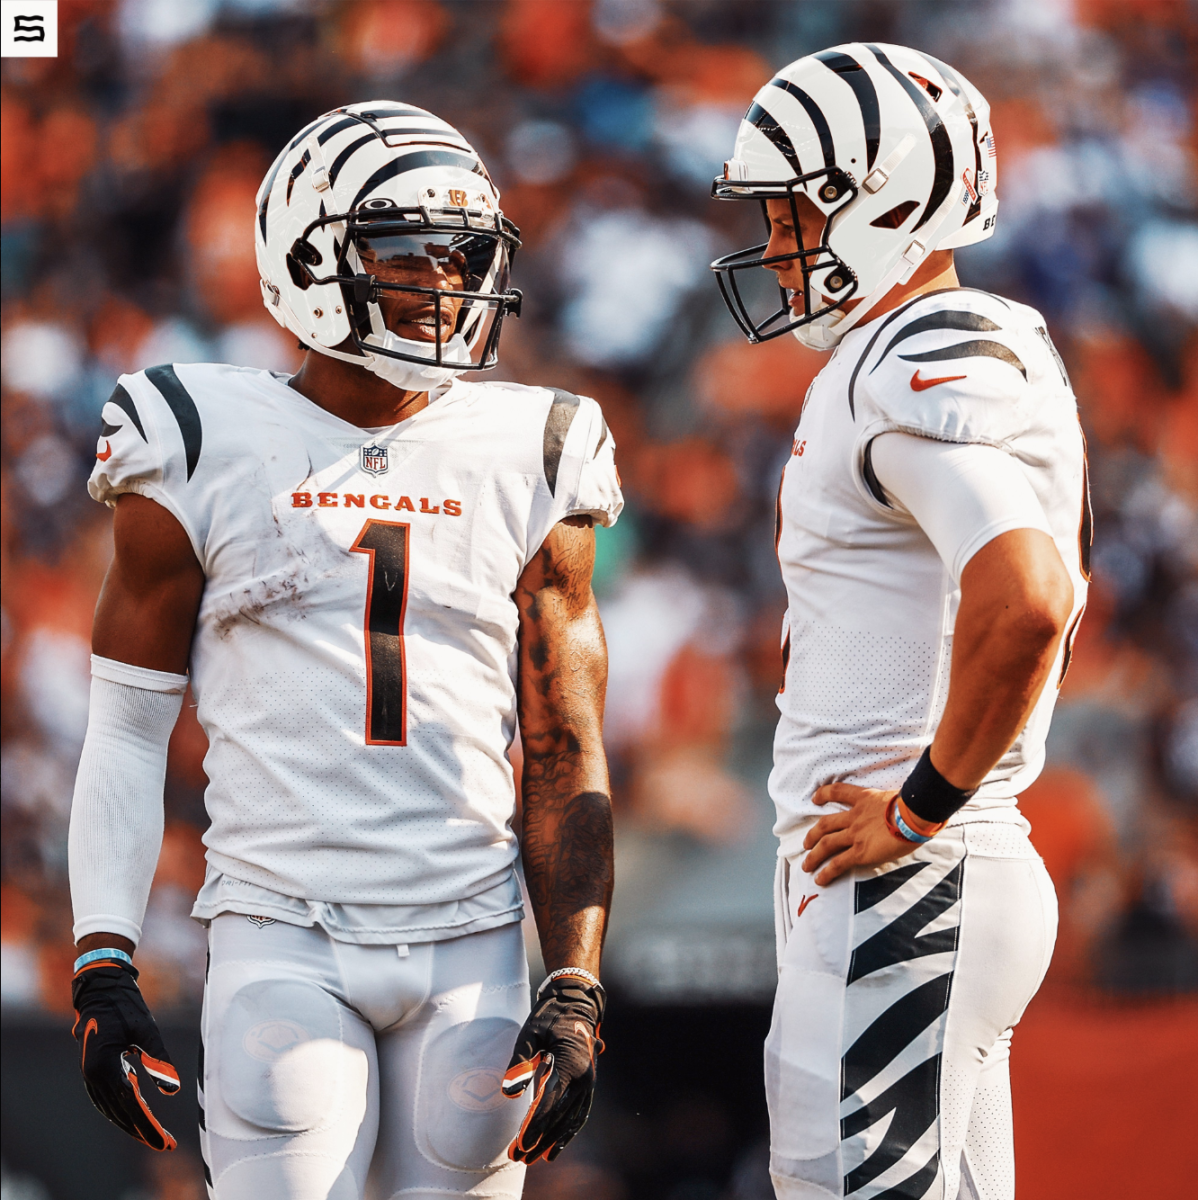 Bengals to wear White Bengal helmet with primary white jersey - A